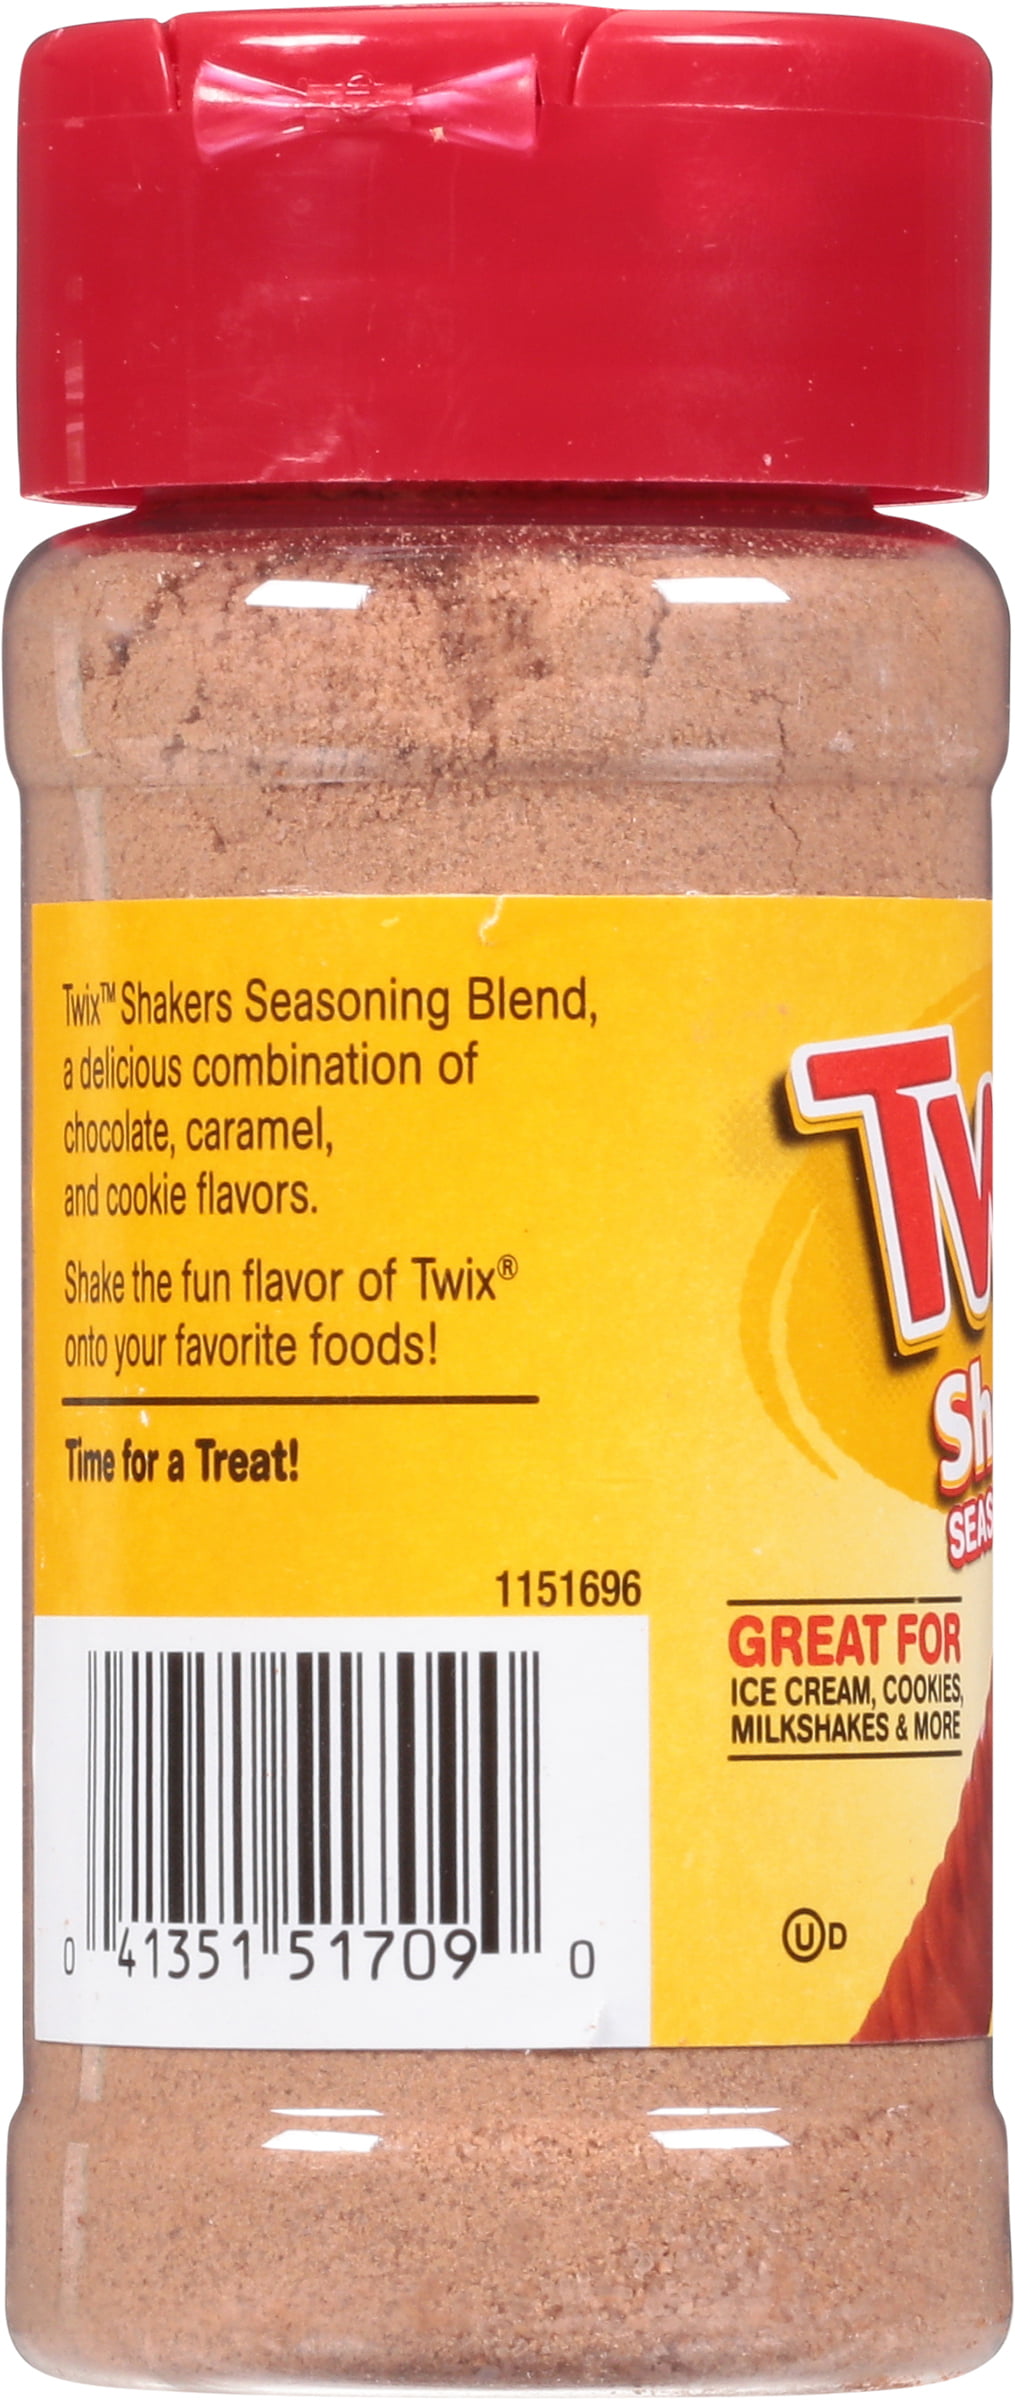 Twix Candy Bars Now Come as Shakeable Seasoning